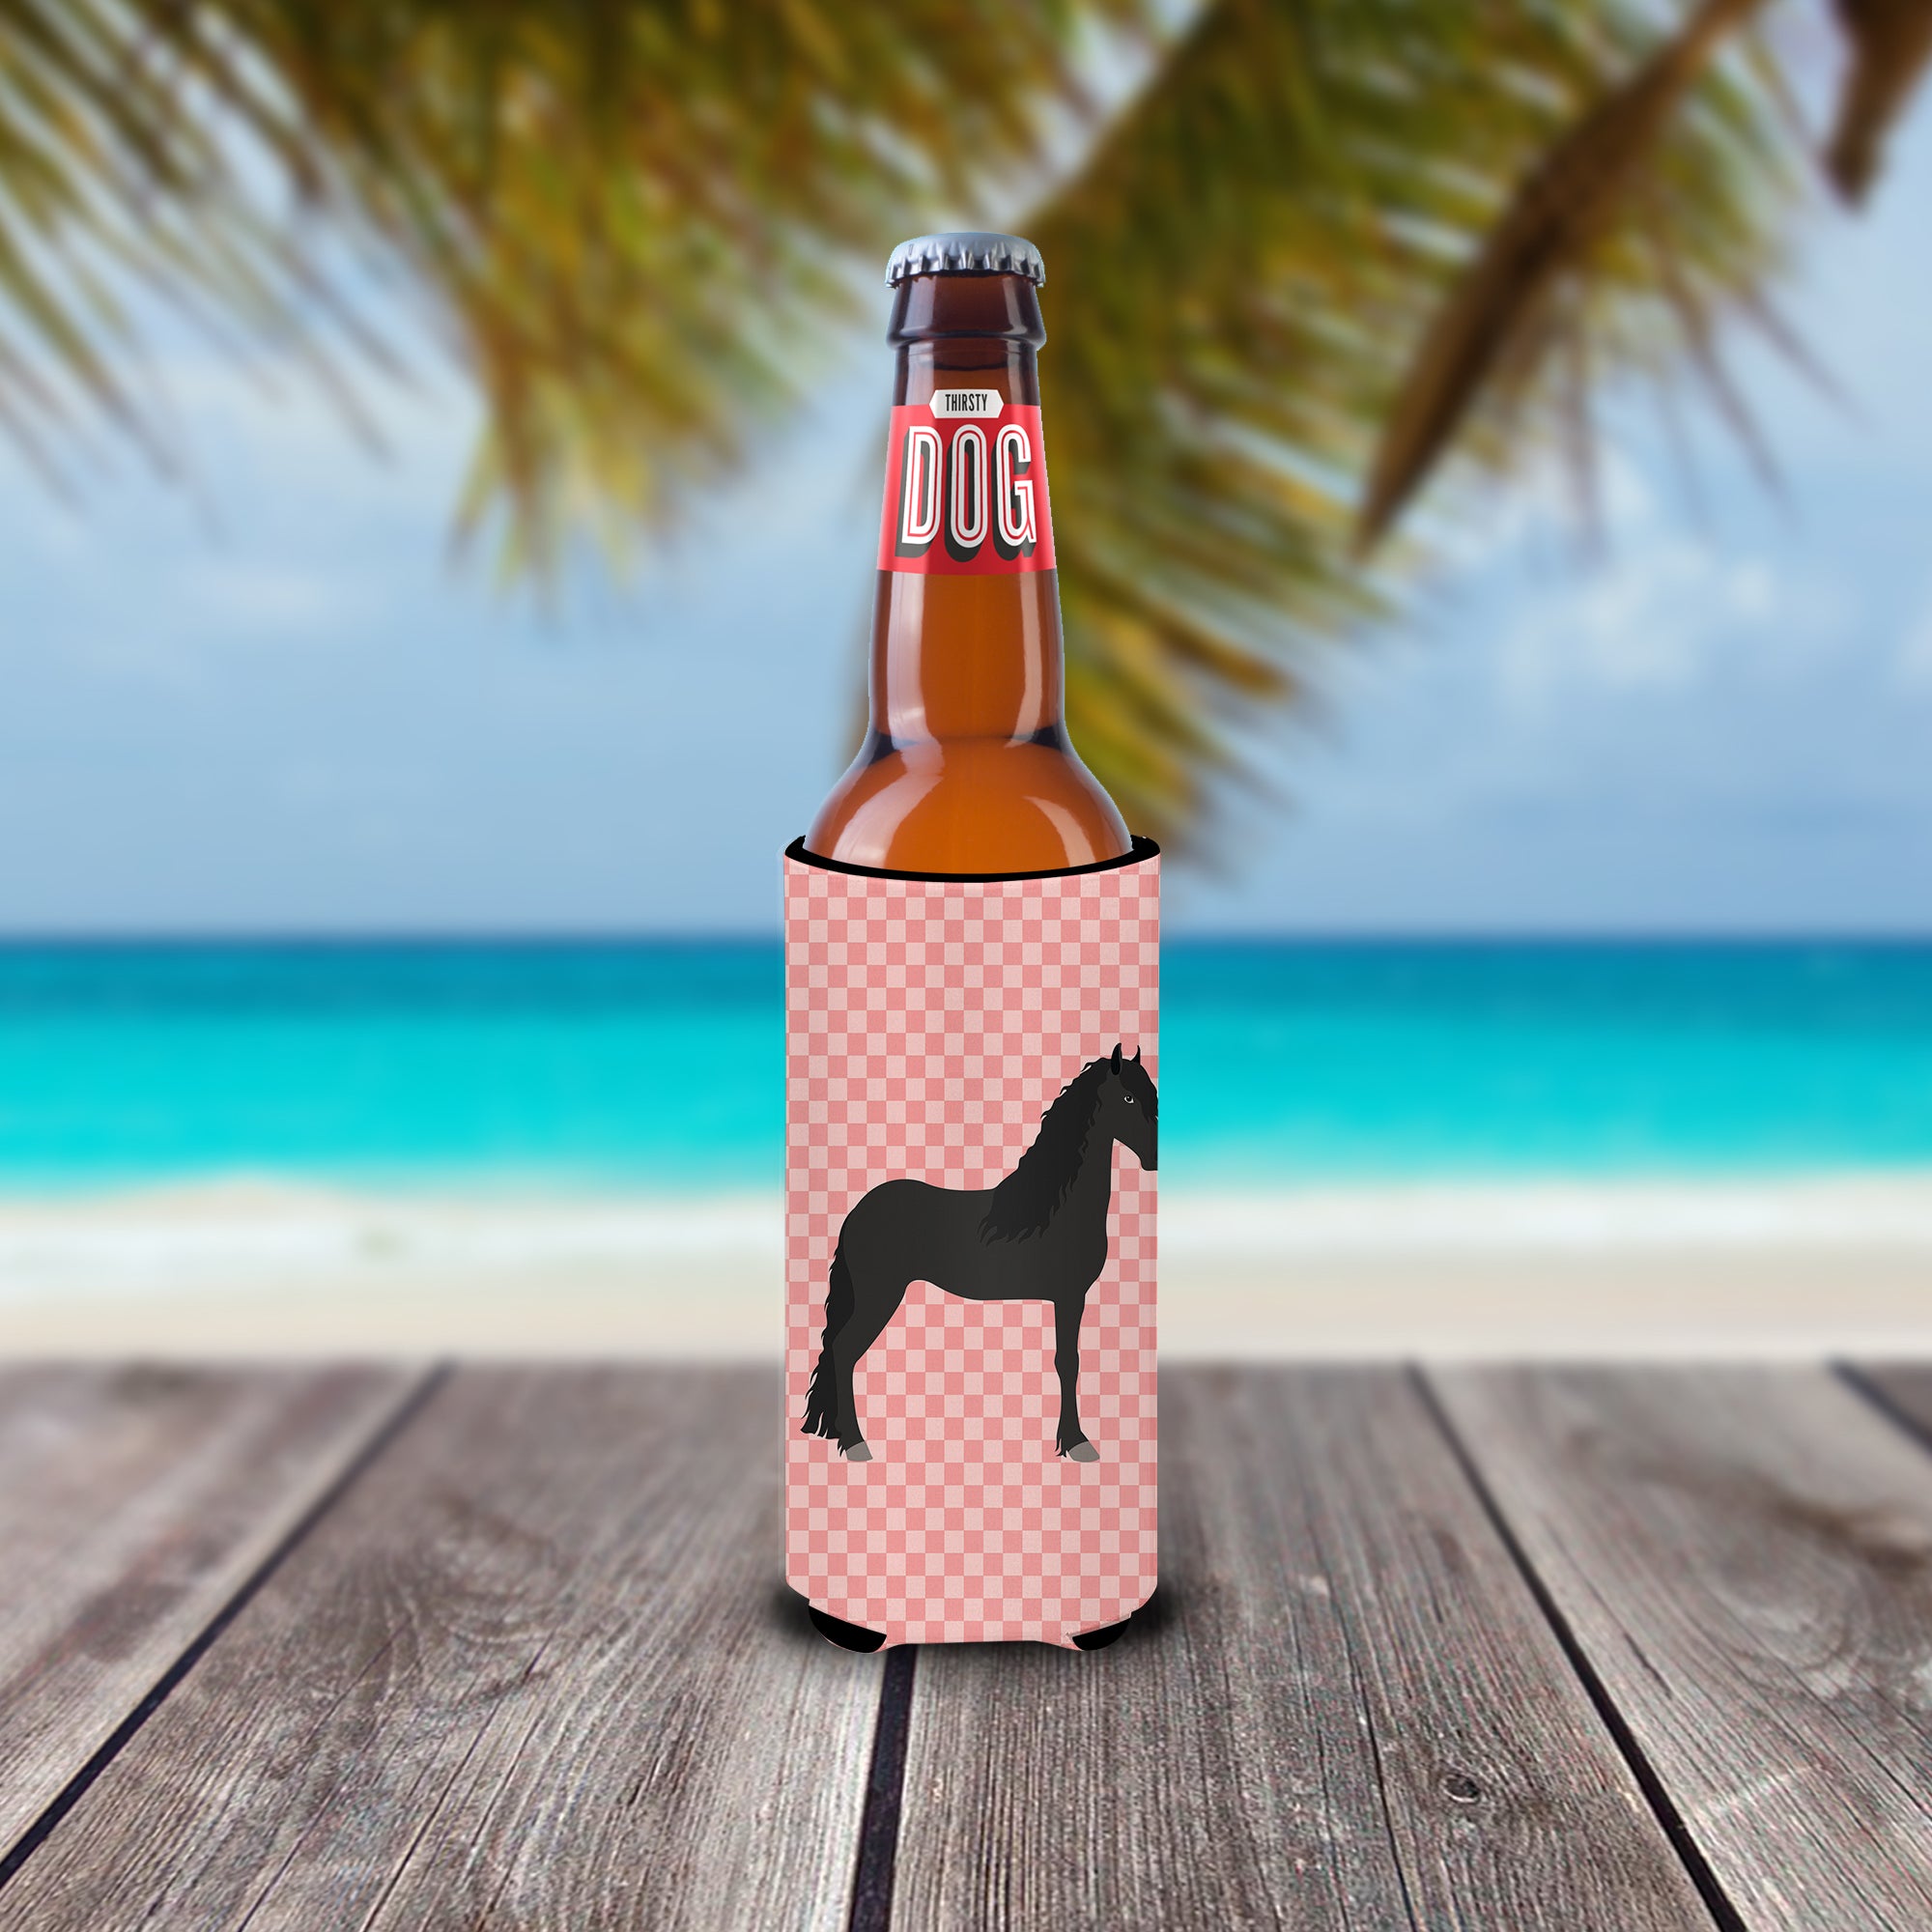 Friesian Horse Pink Check  Ultra Hugger for slim cans  the-store.com.